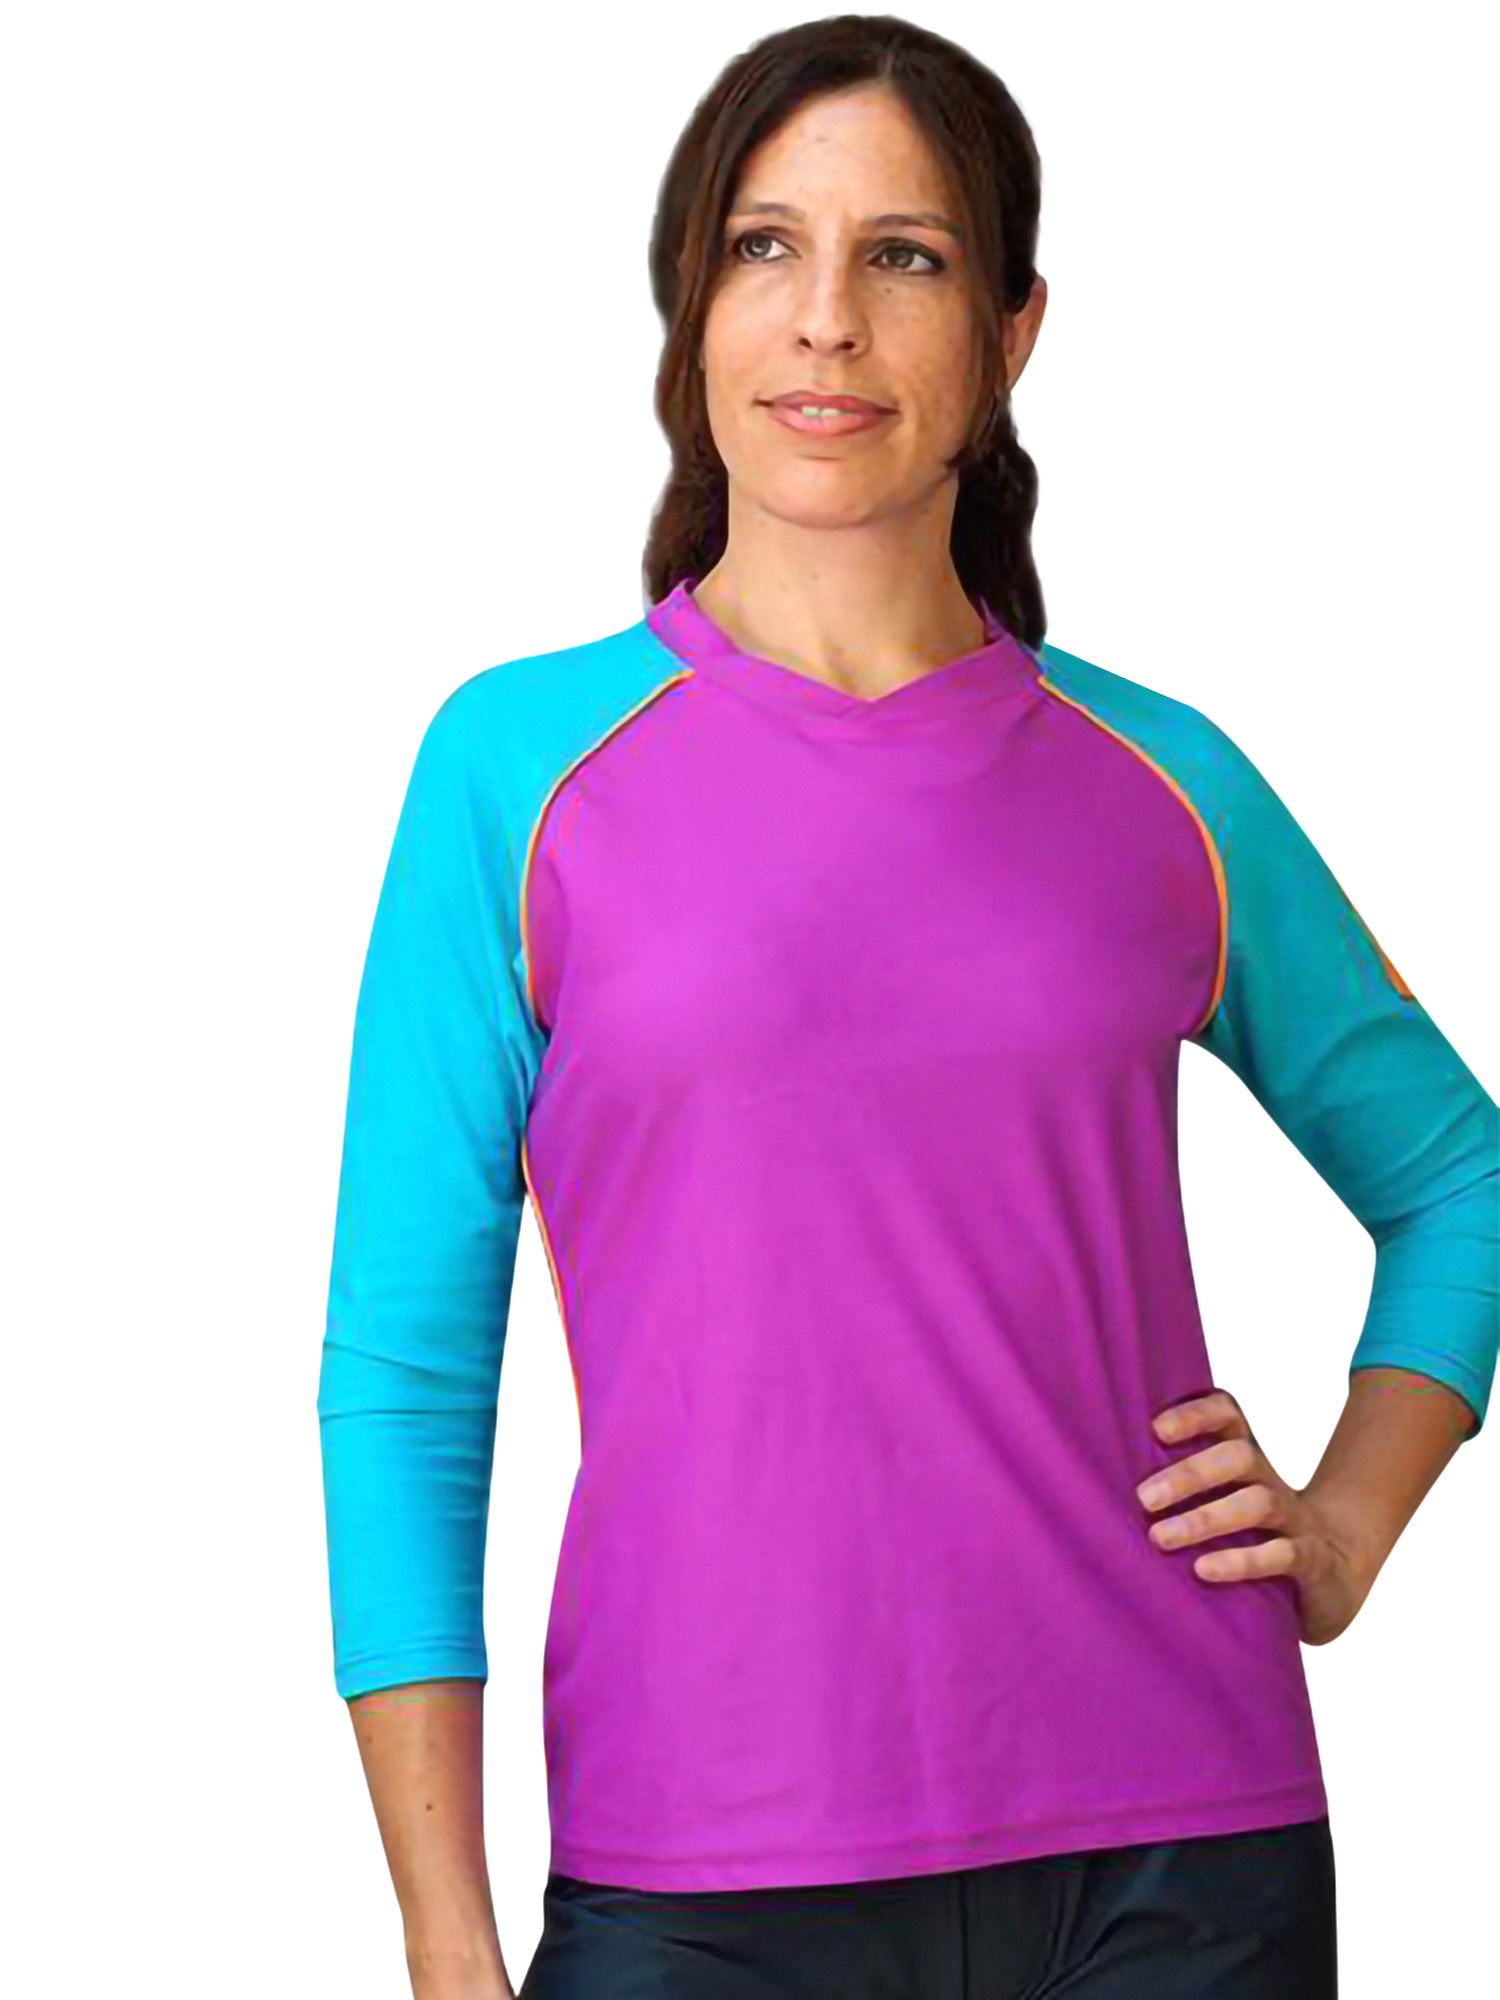 Swim Shirts & Surf Tees for Women - Shop the Collection